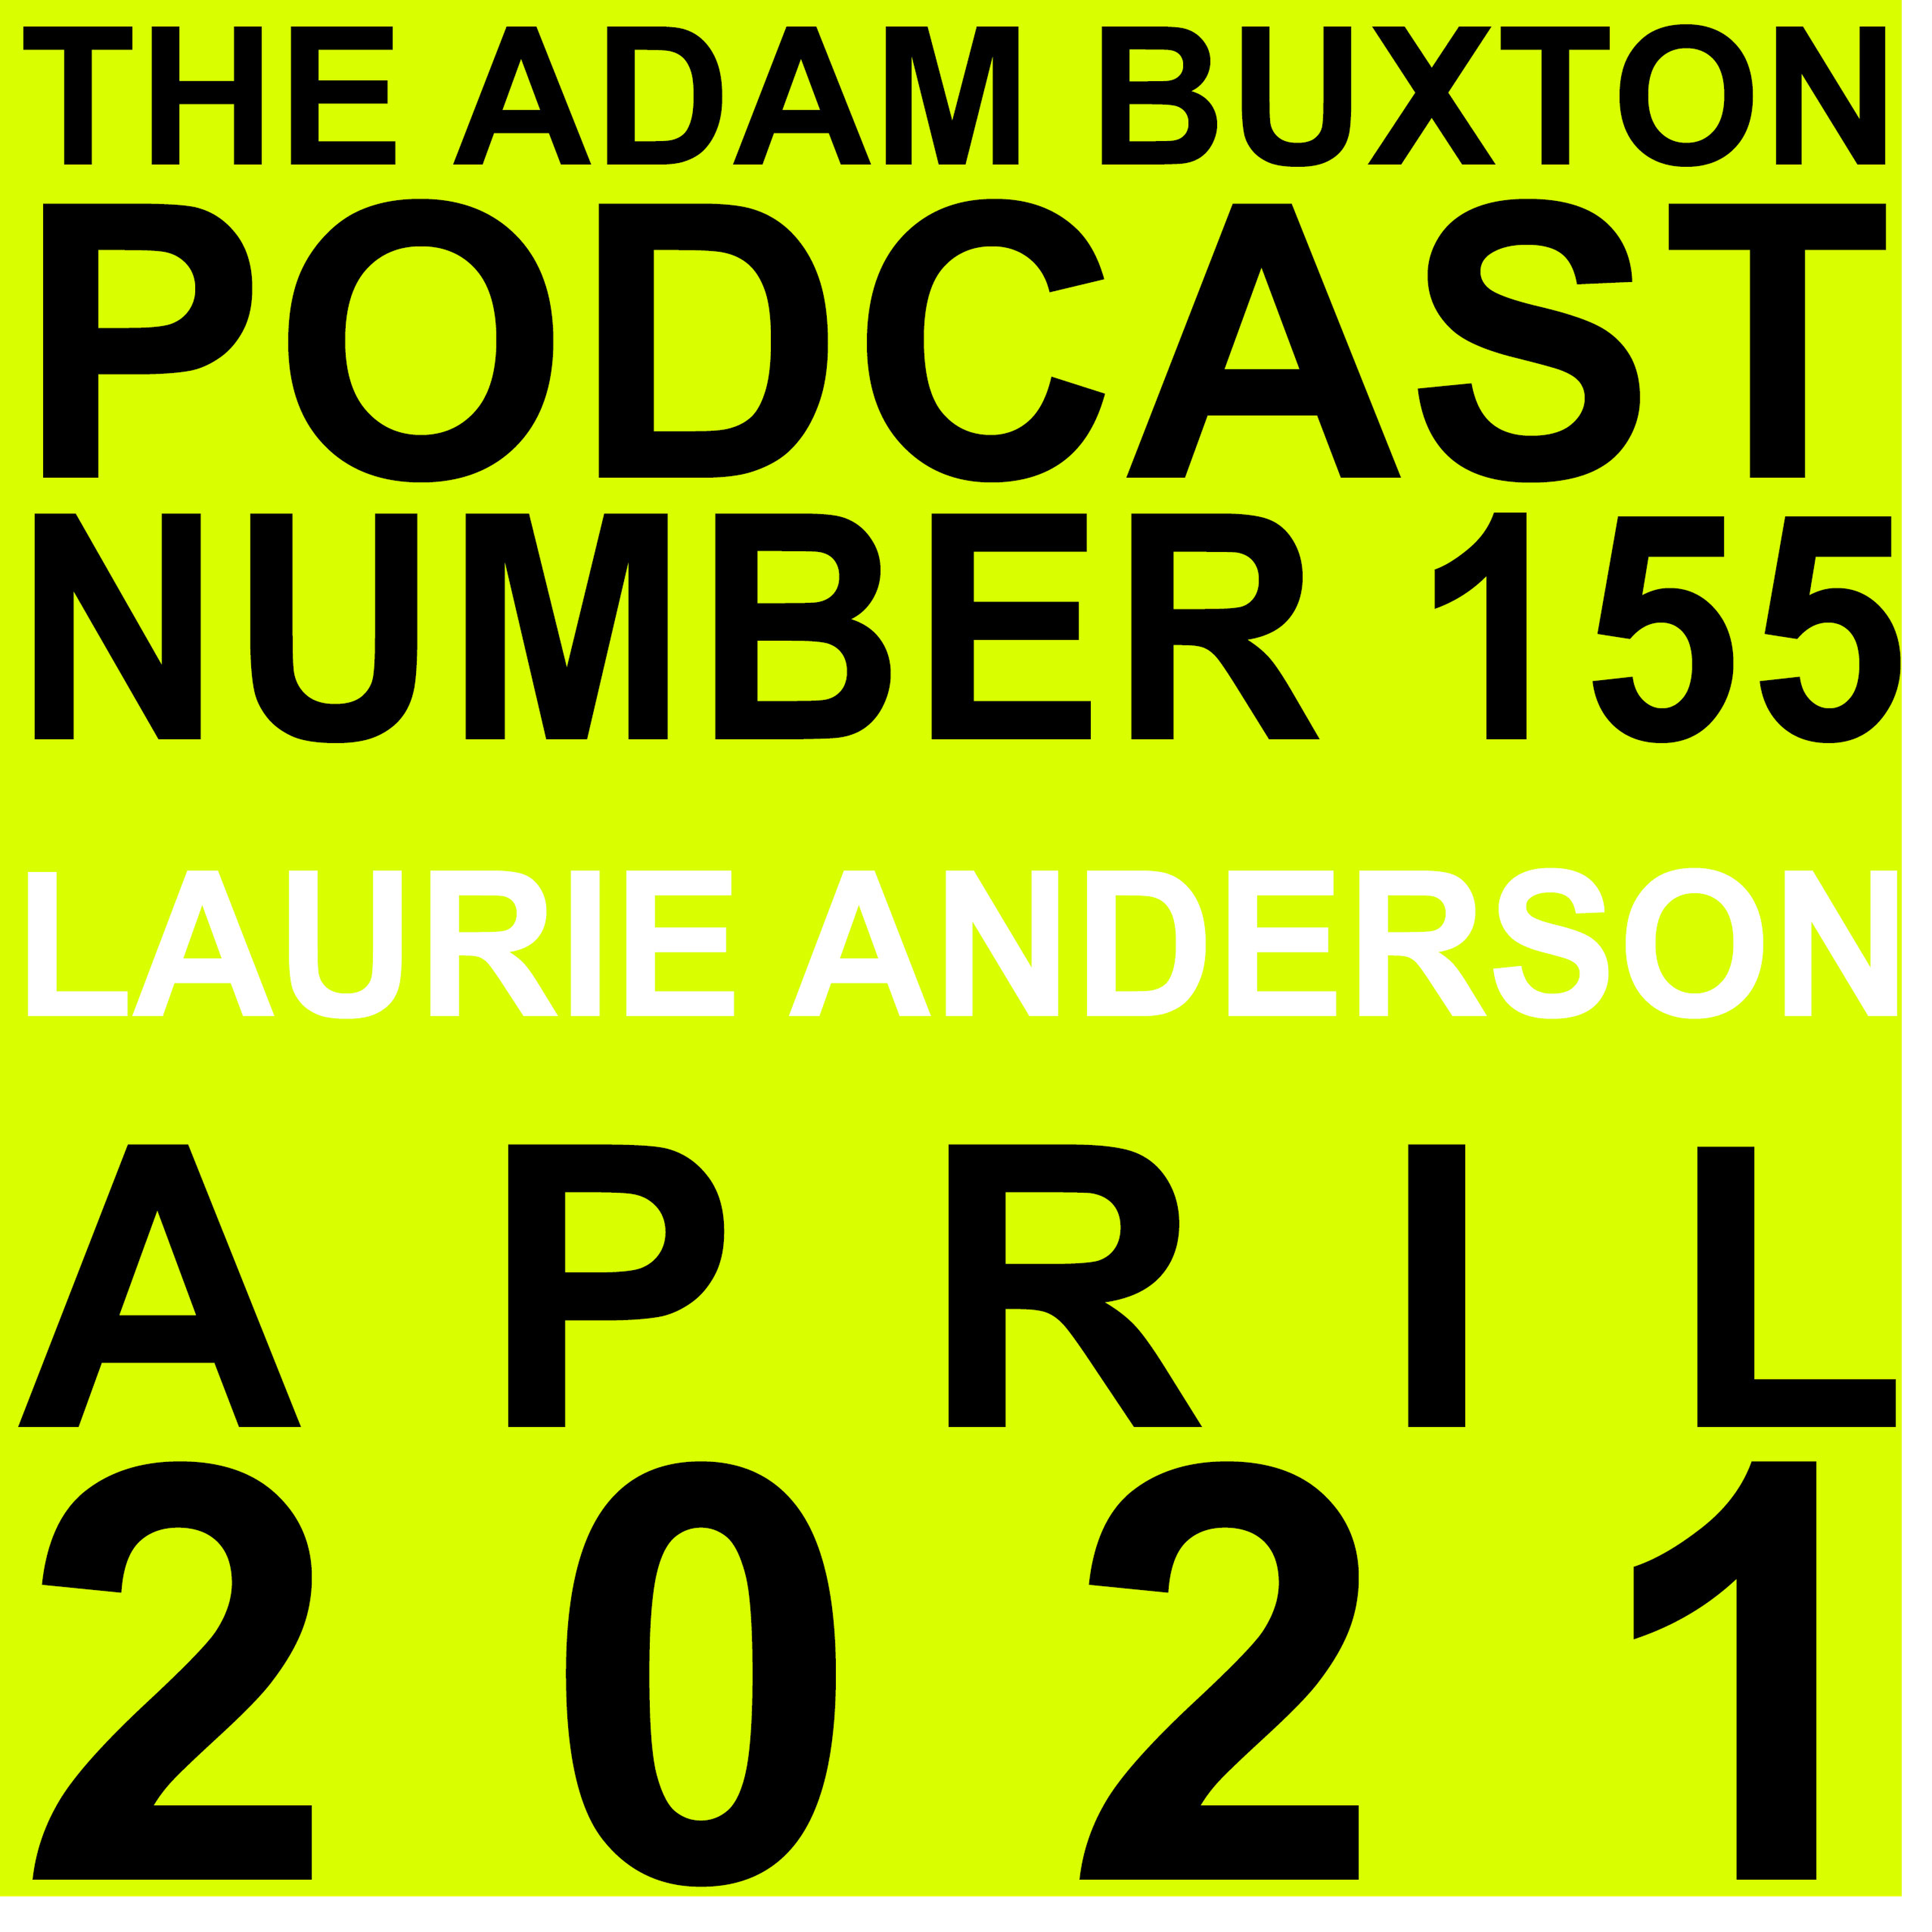 EP.155 - LAURIE ANDERSON